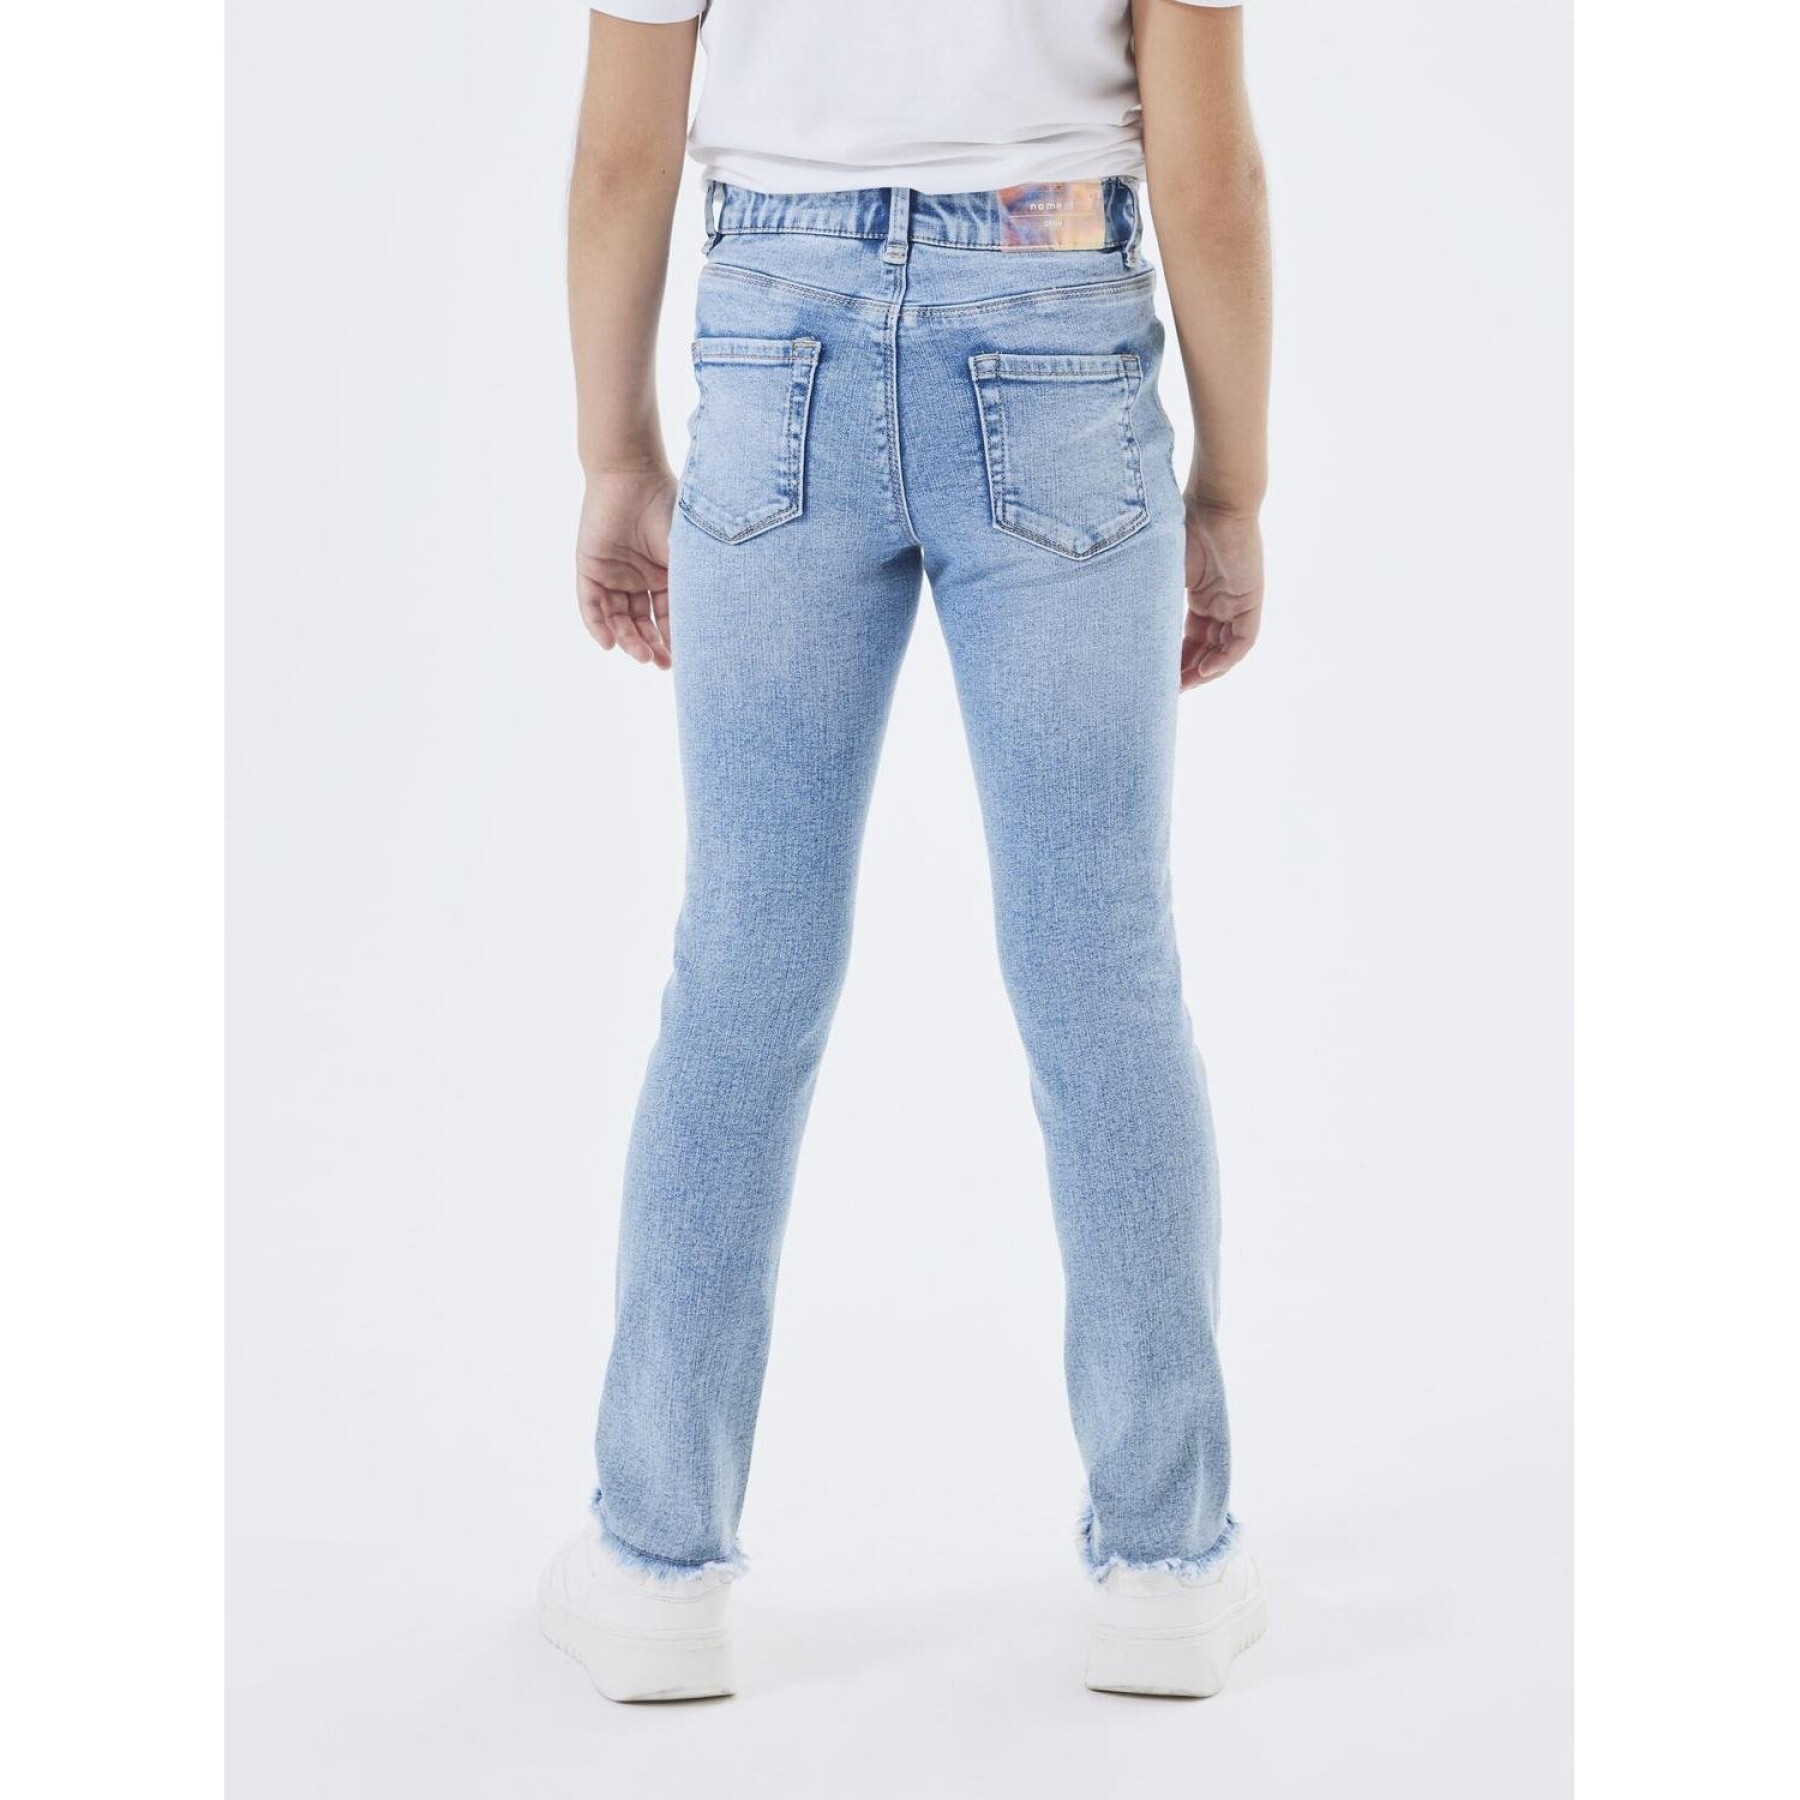 Skinny Jeans, Mädchen Name it Polly 3173-AU